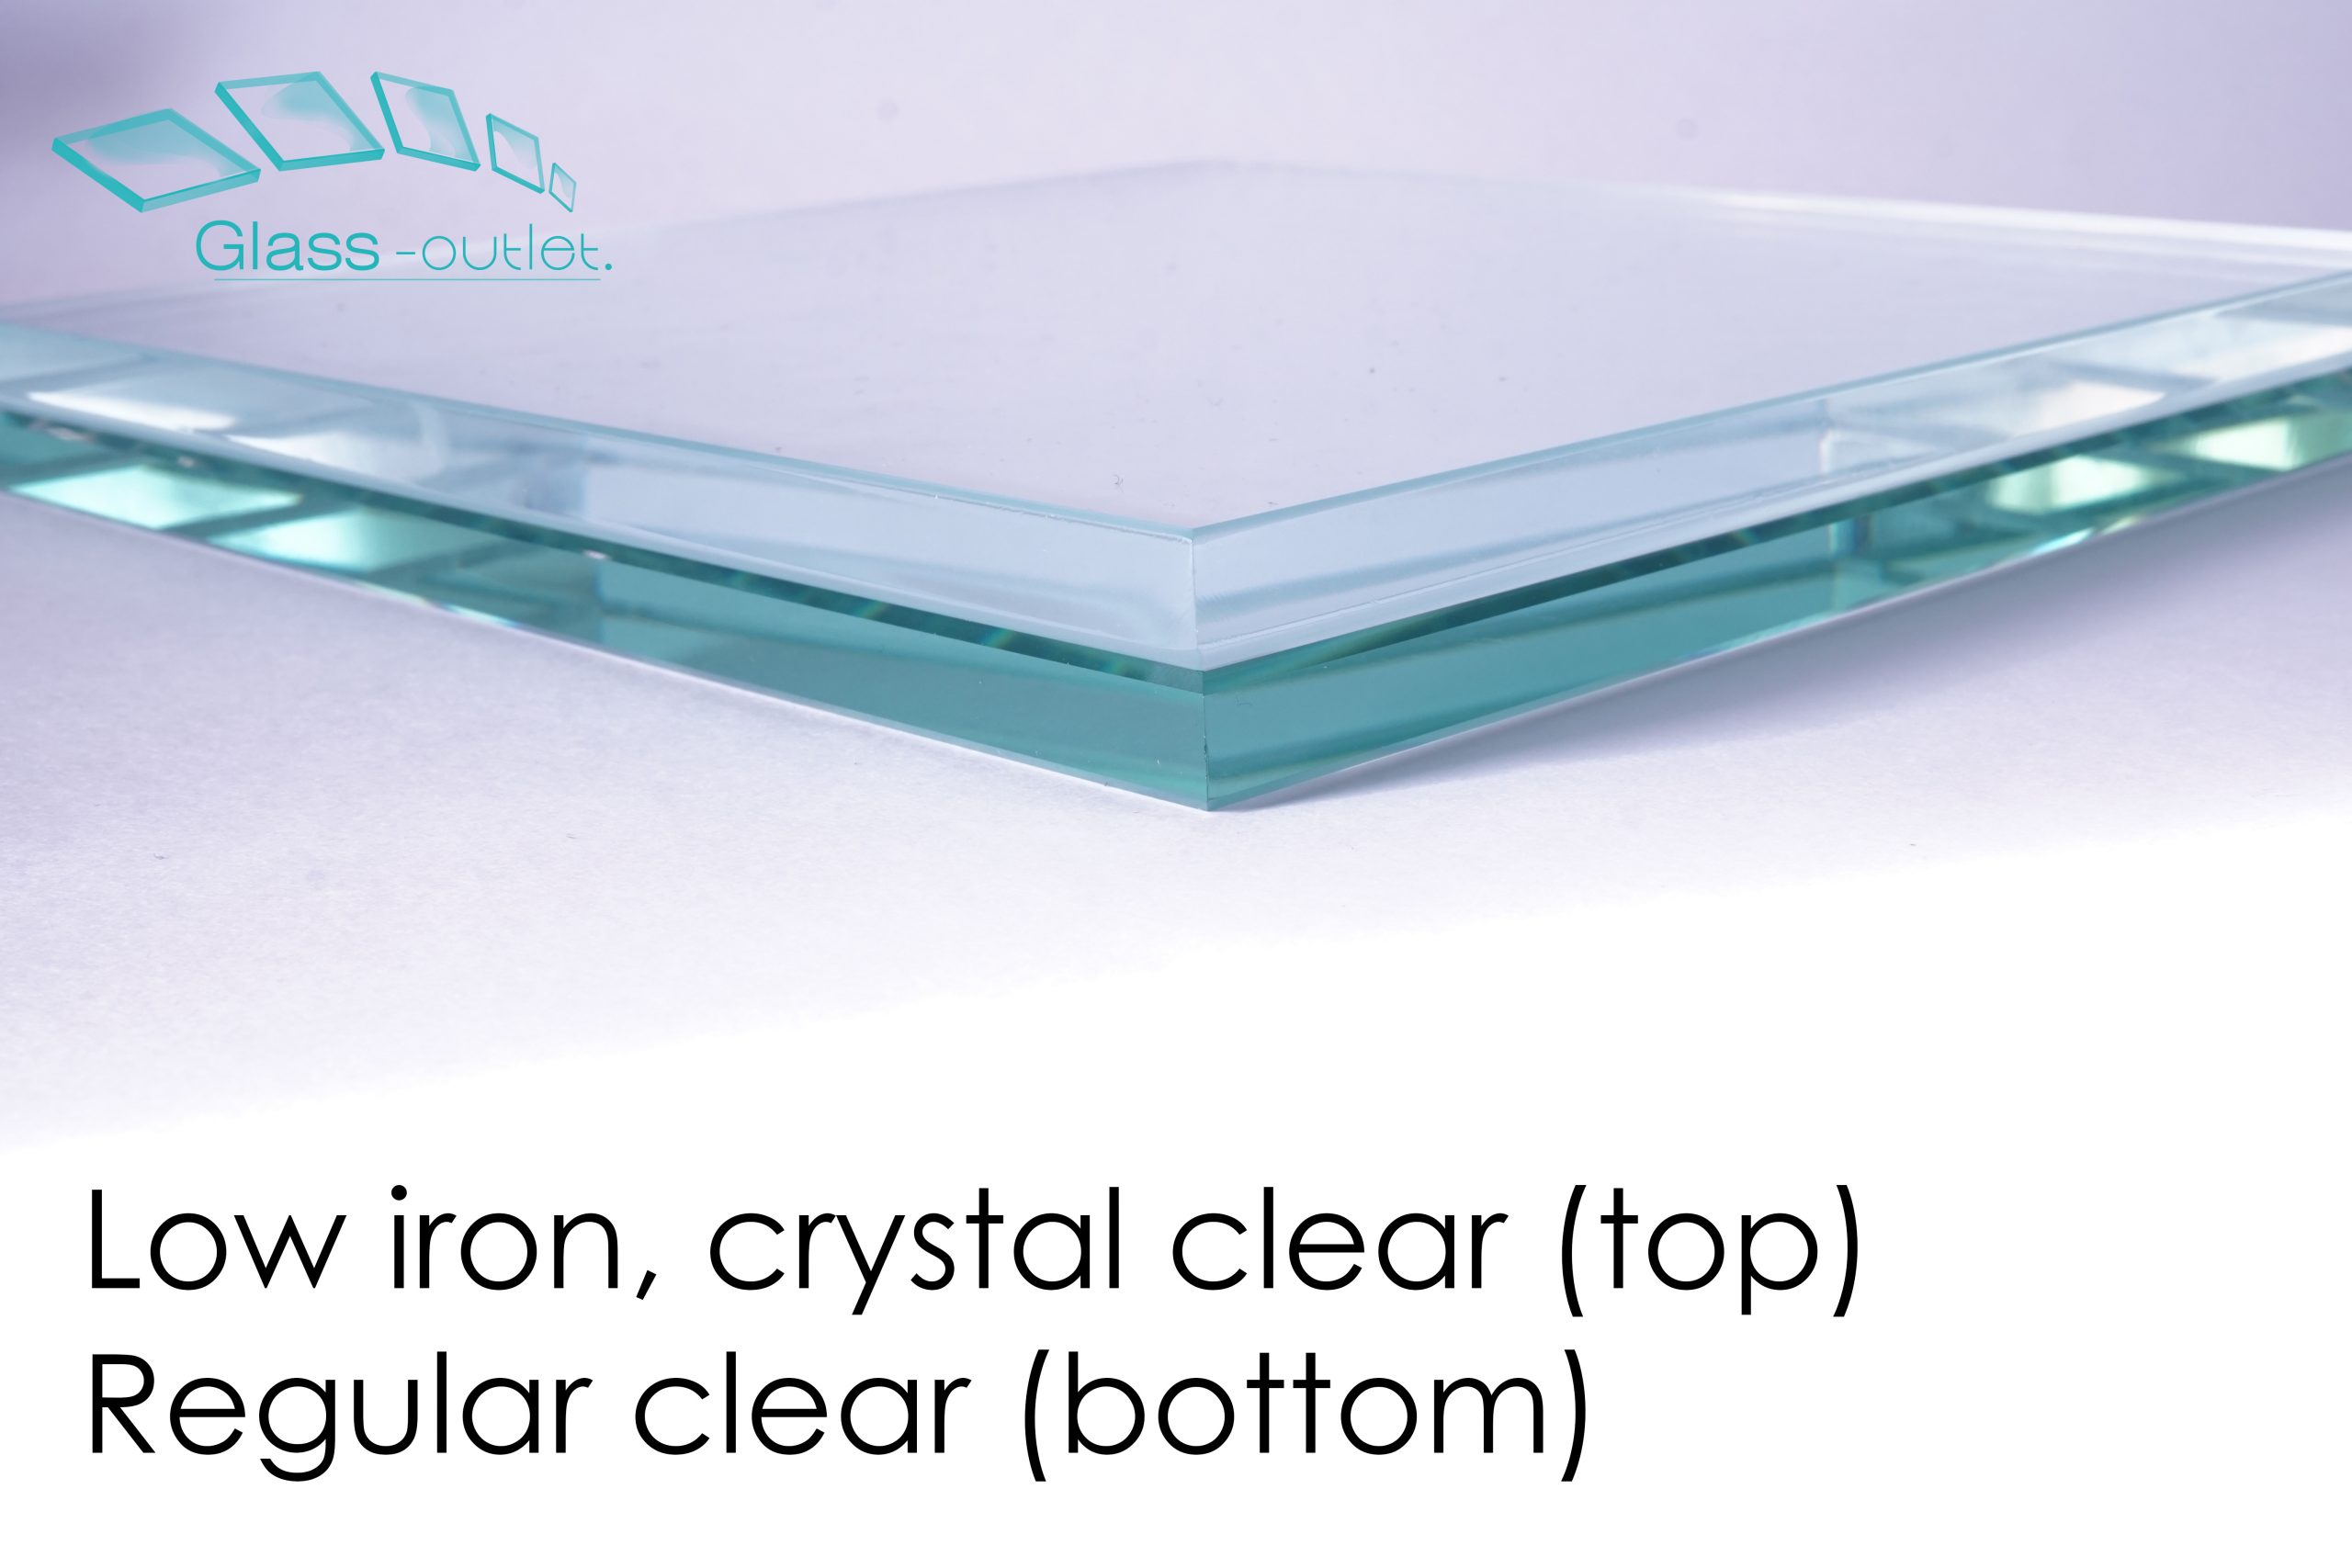 6 difference between clear glass and low iron glass